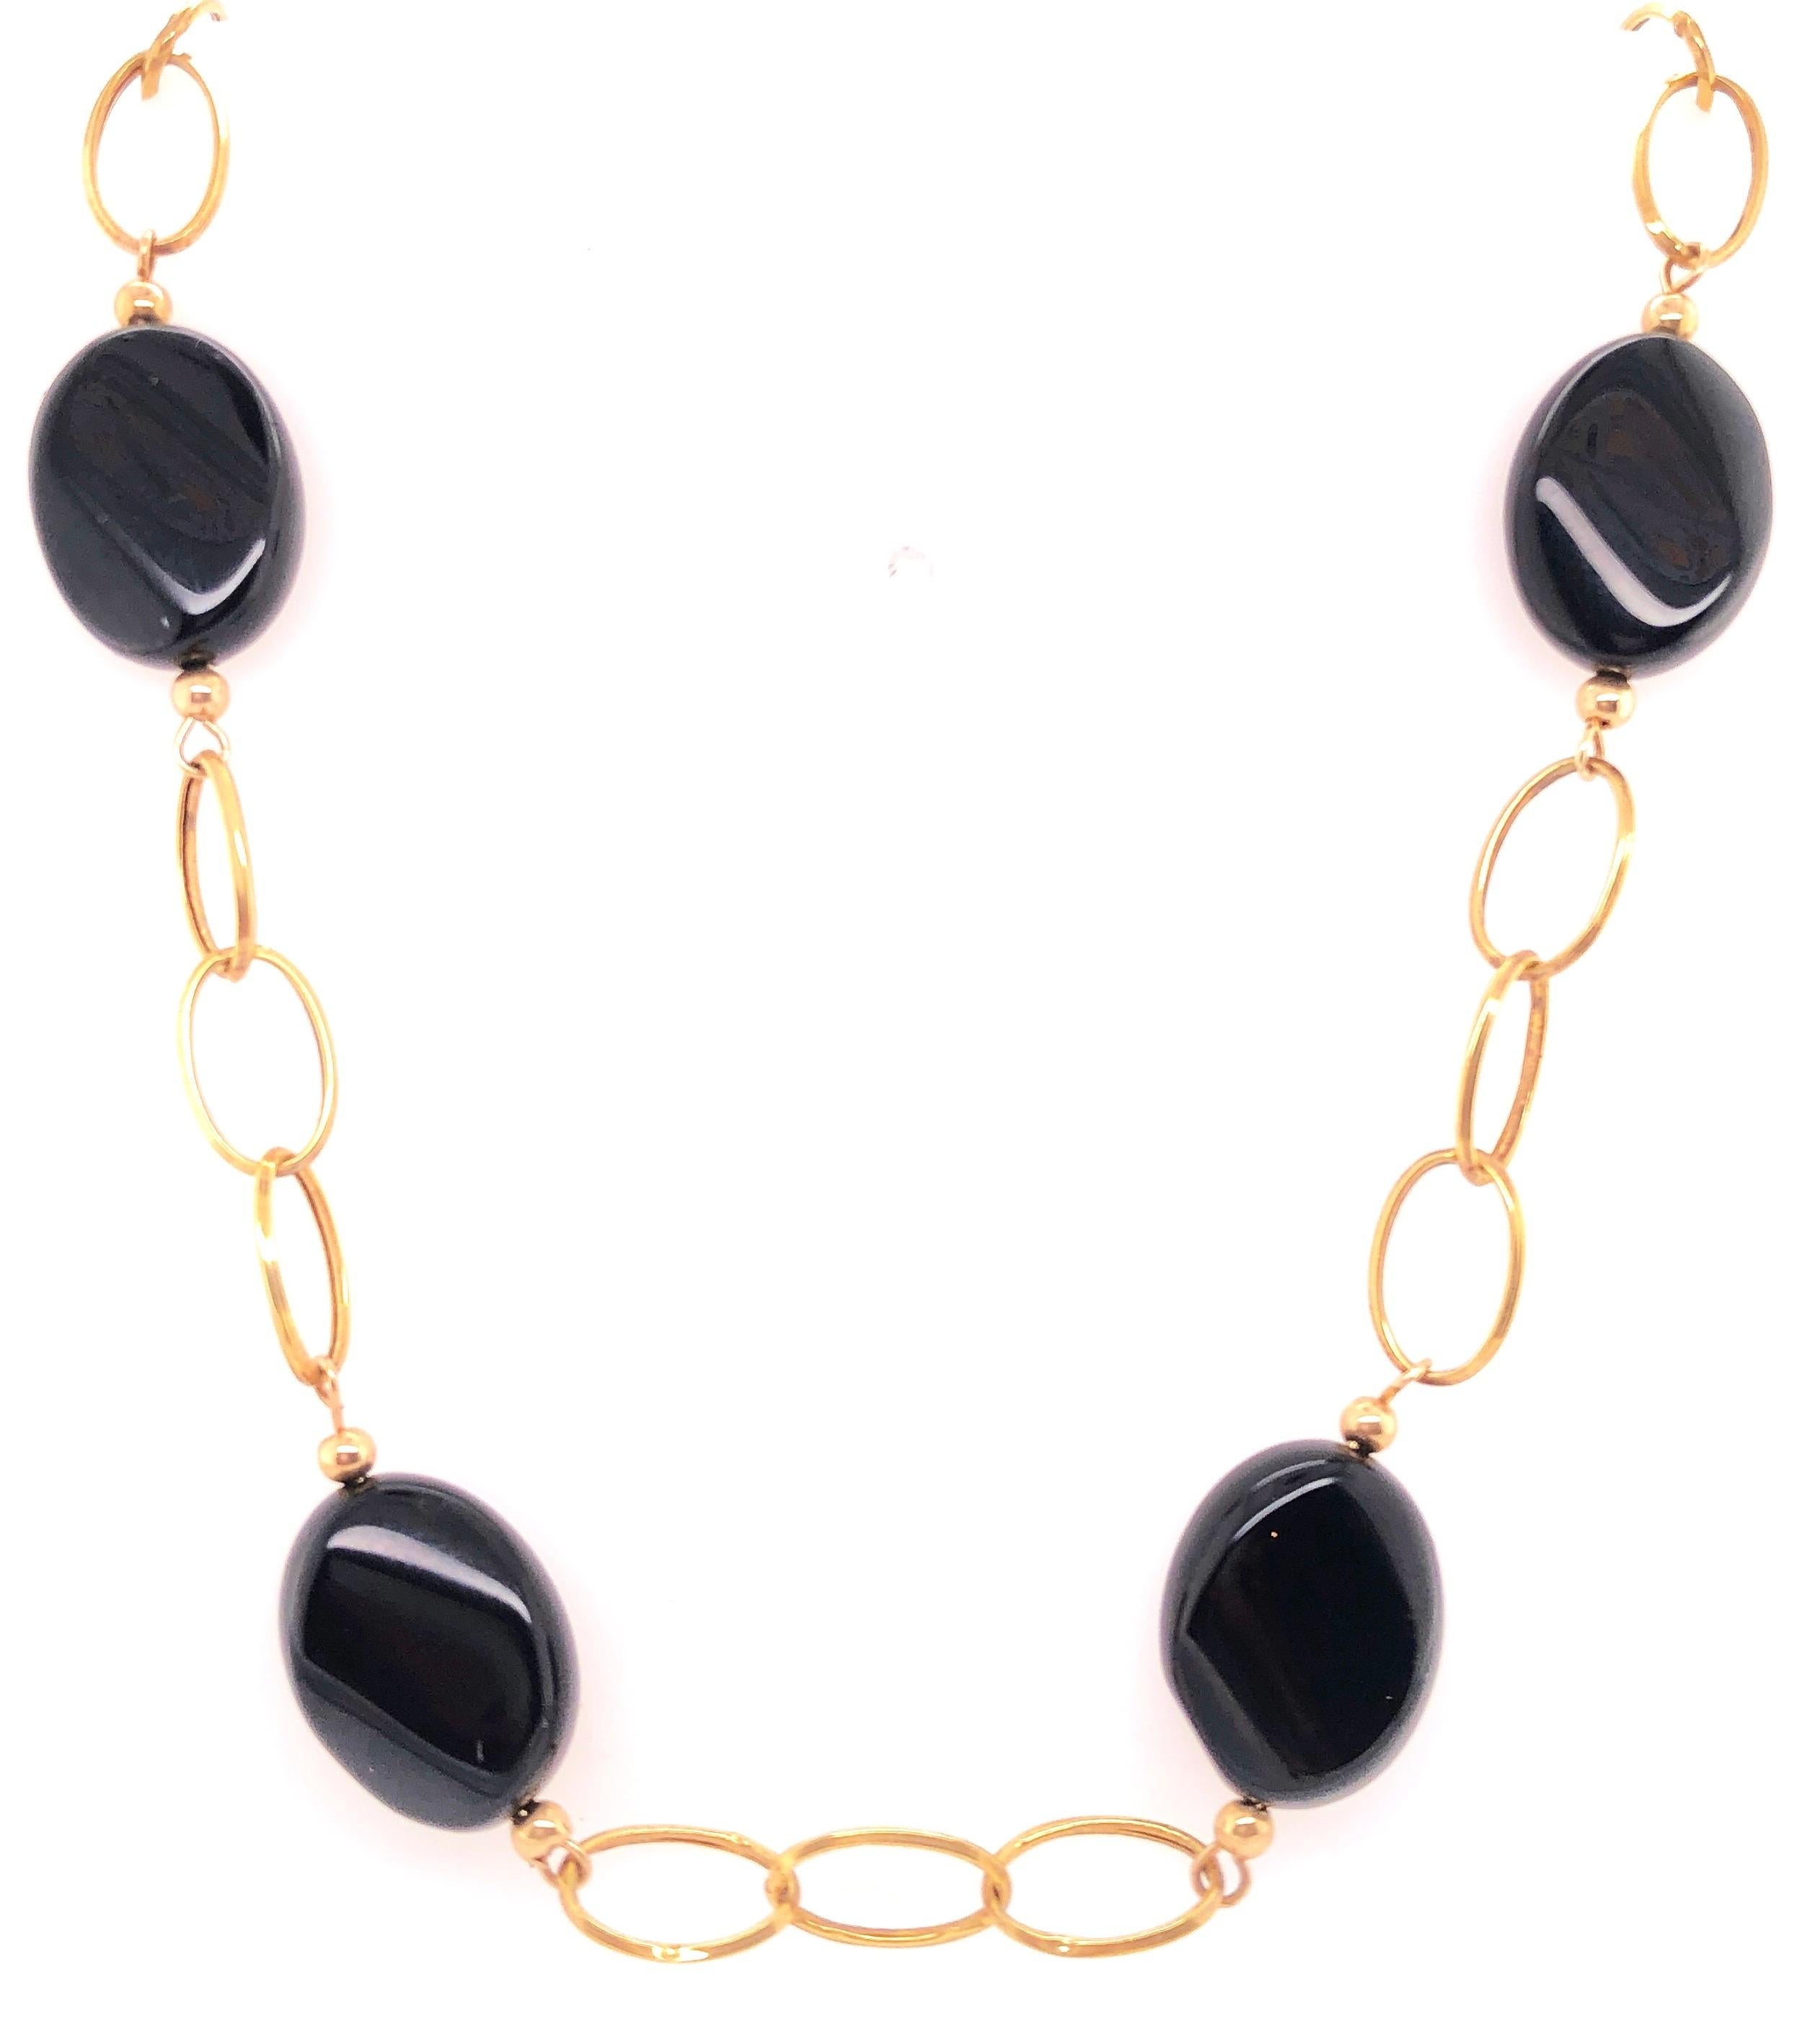 14 Karat Yellow Gold Link Necklace with Ebony Stones 21.2 Grams Total For Sale 3